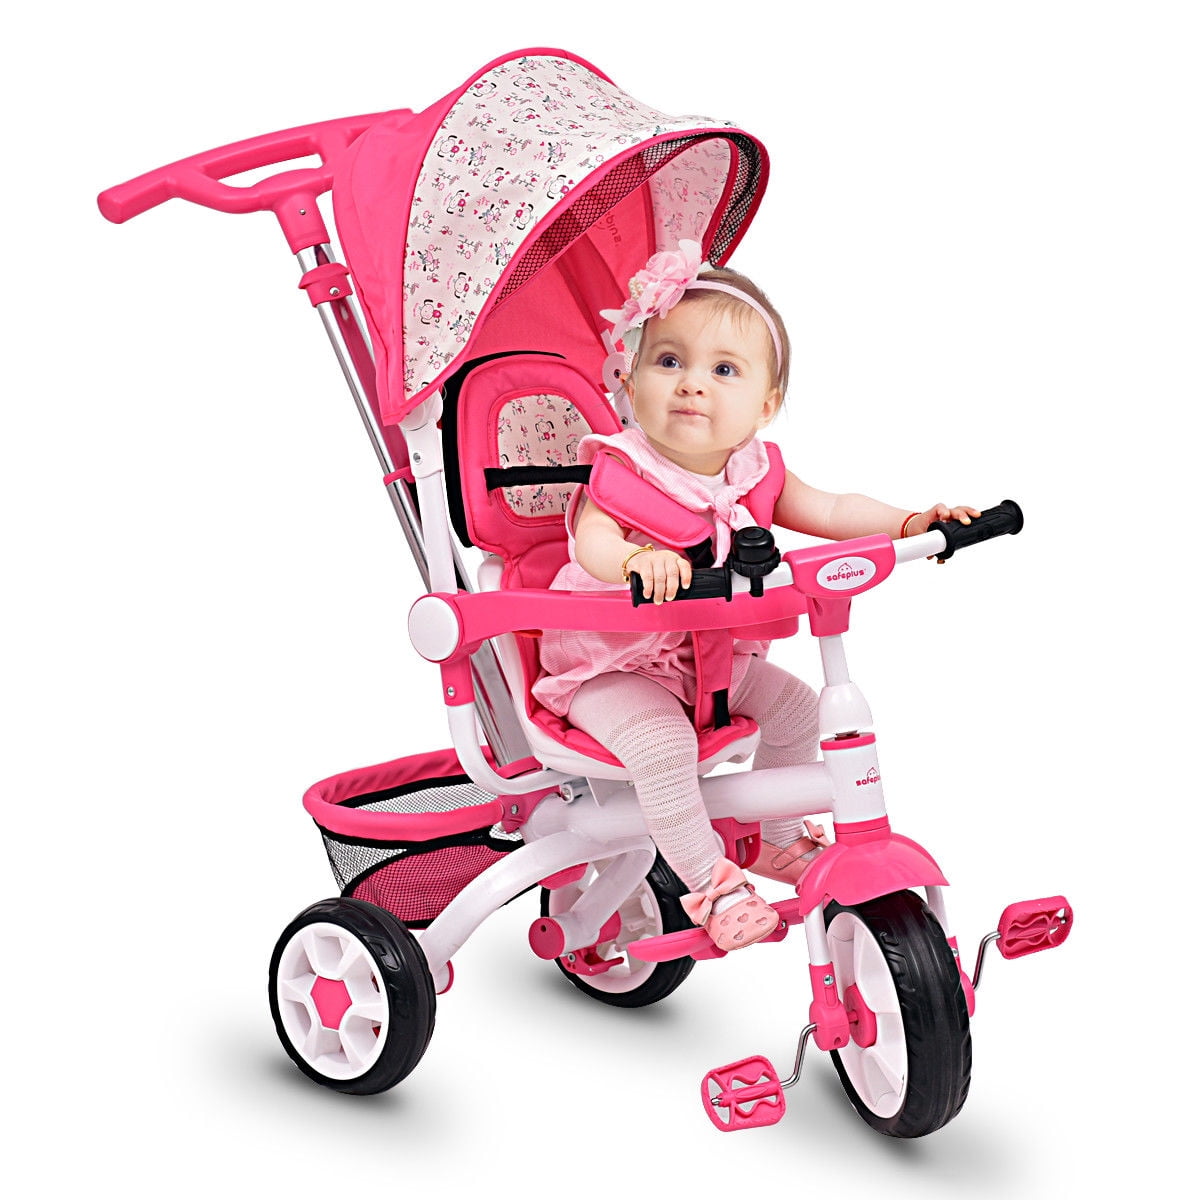 4-in-1 Detachable Baby Stroller Tricycle with Round Canopy - Pink